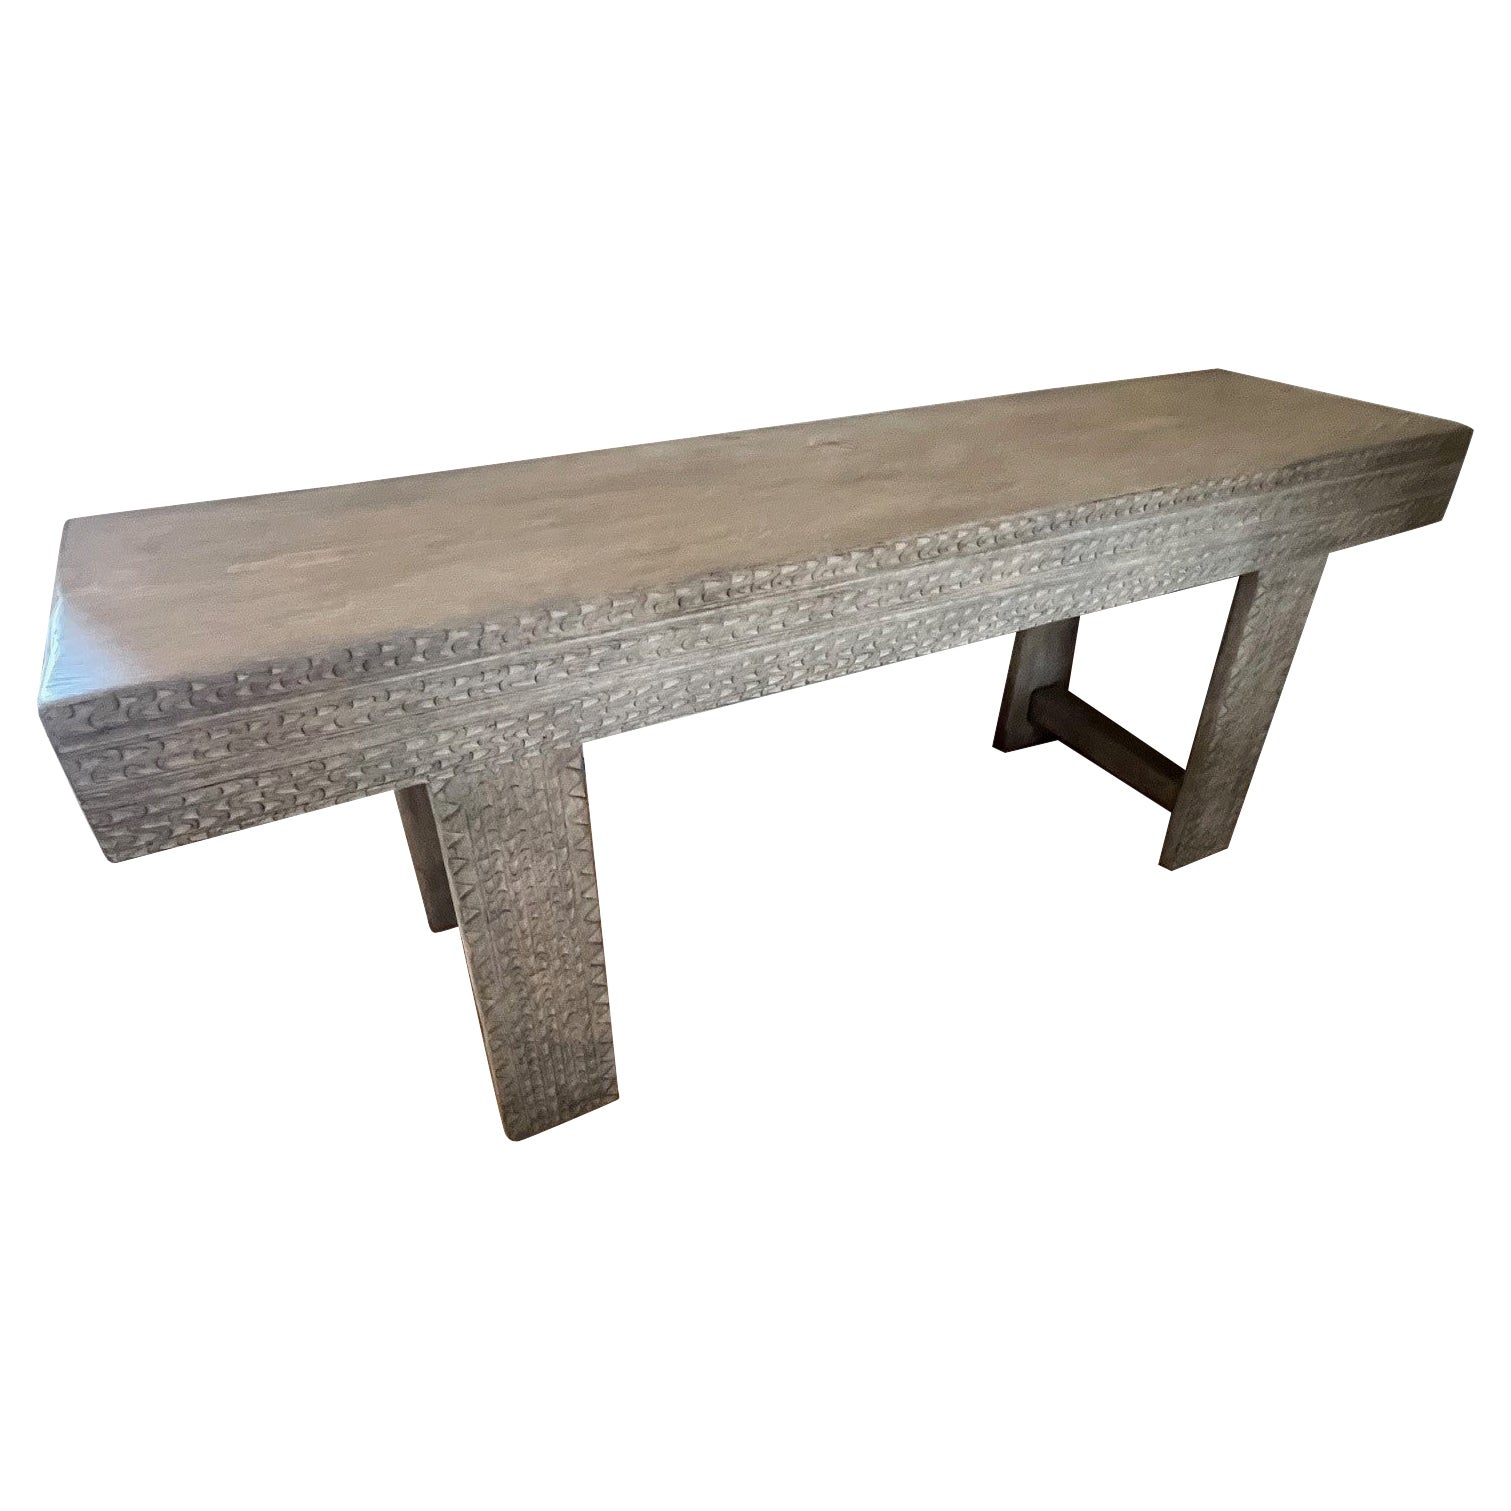 Made to Order Handcarved and Handcrafted Sugar Pine Pyrenees Console